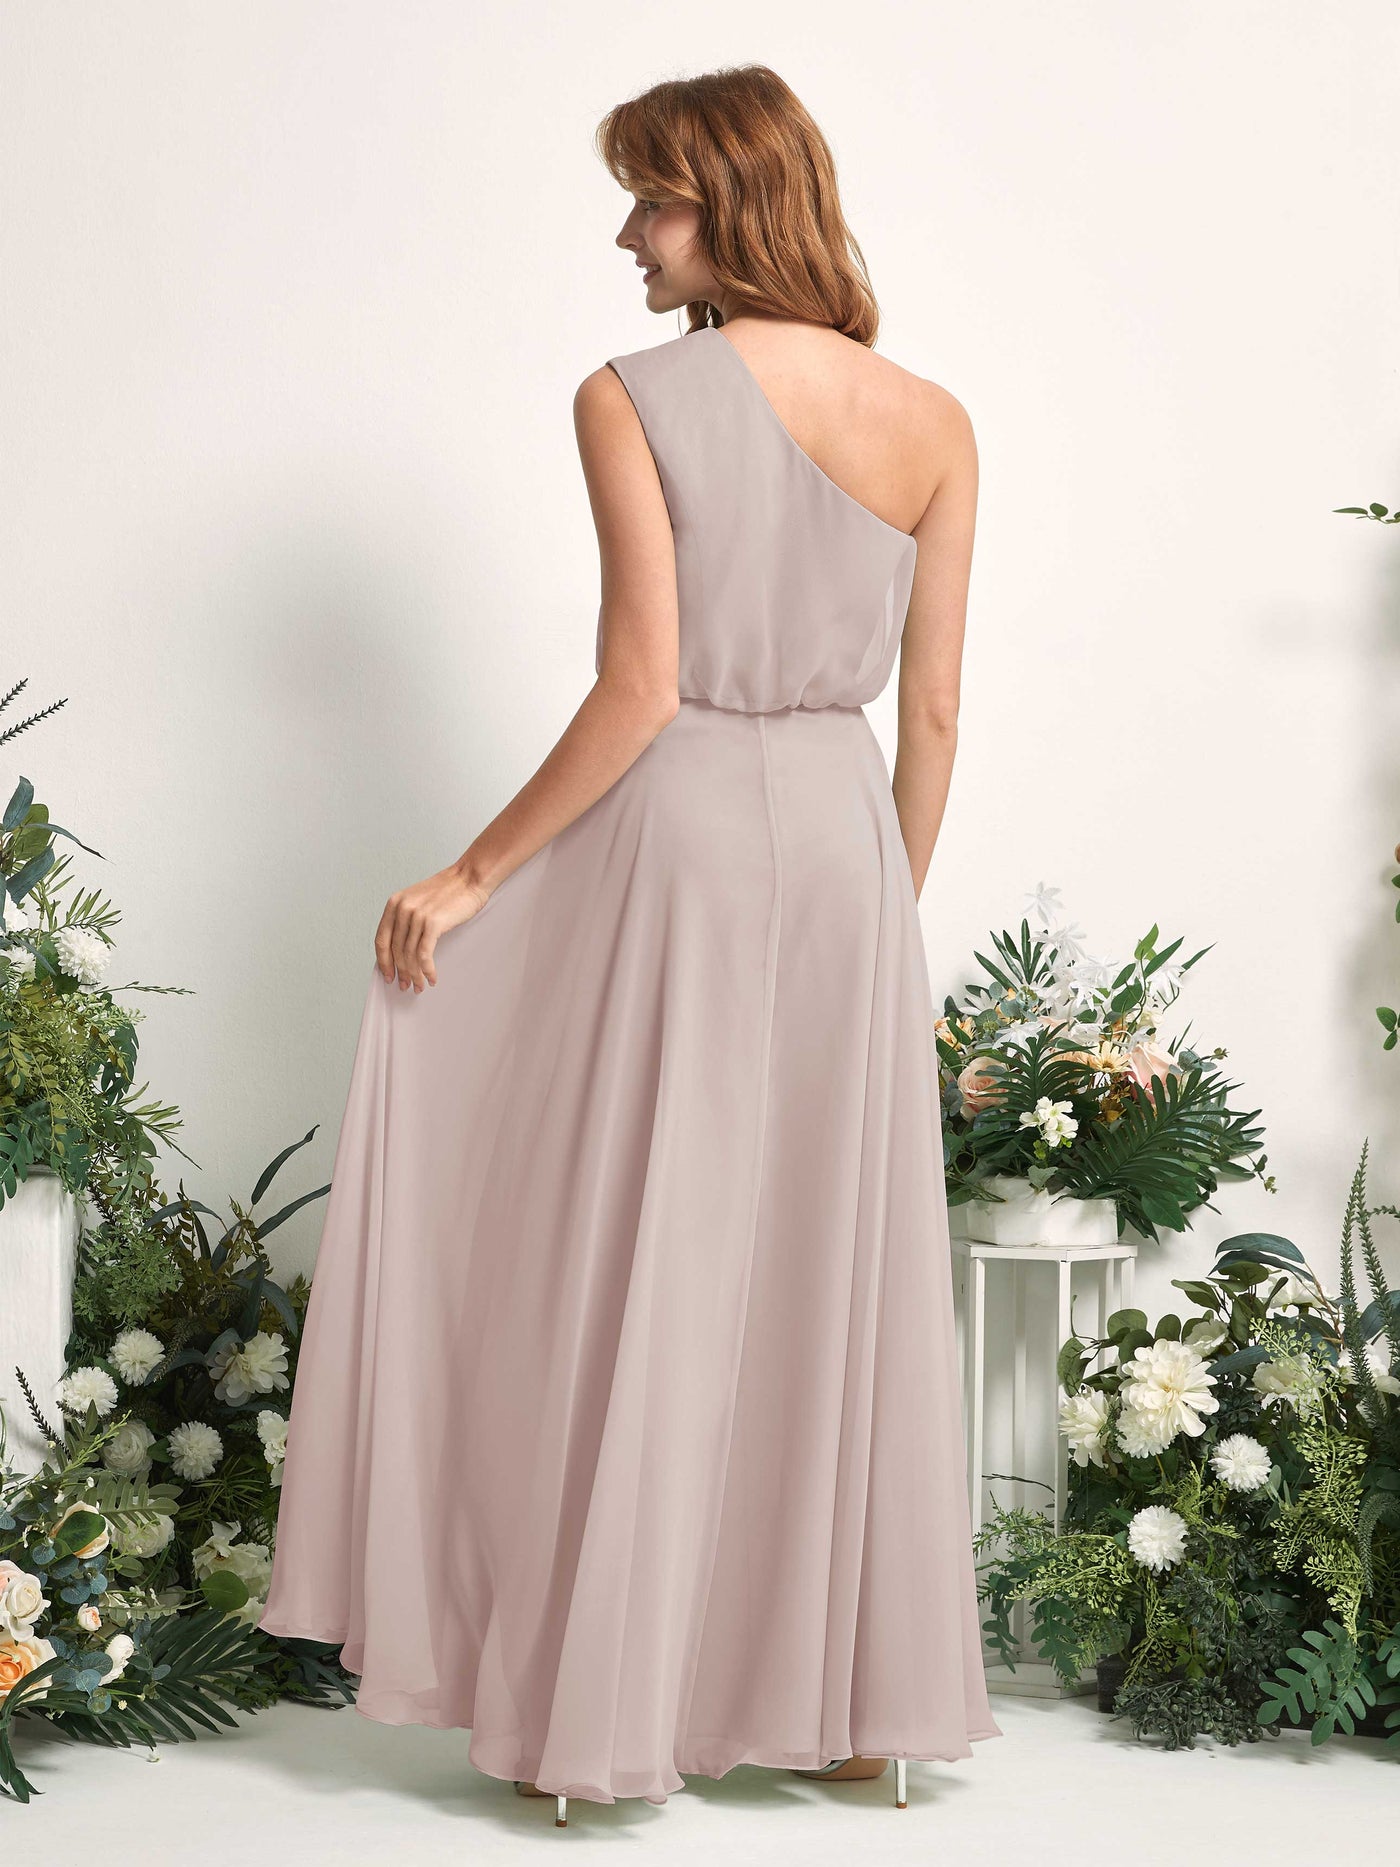 Bridesmaid Dress A-line Chiffon One Shoulder Full Length Sleeveless Wedding Party Dress - Taupe (81226824)#color_taupe